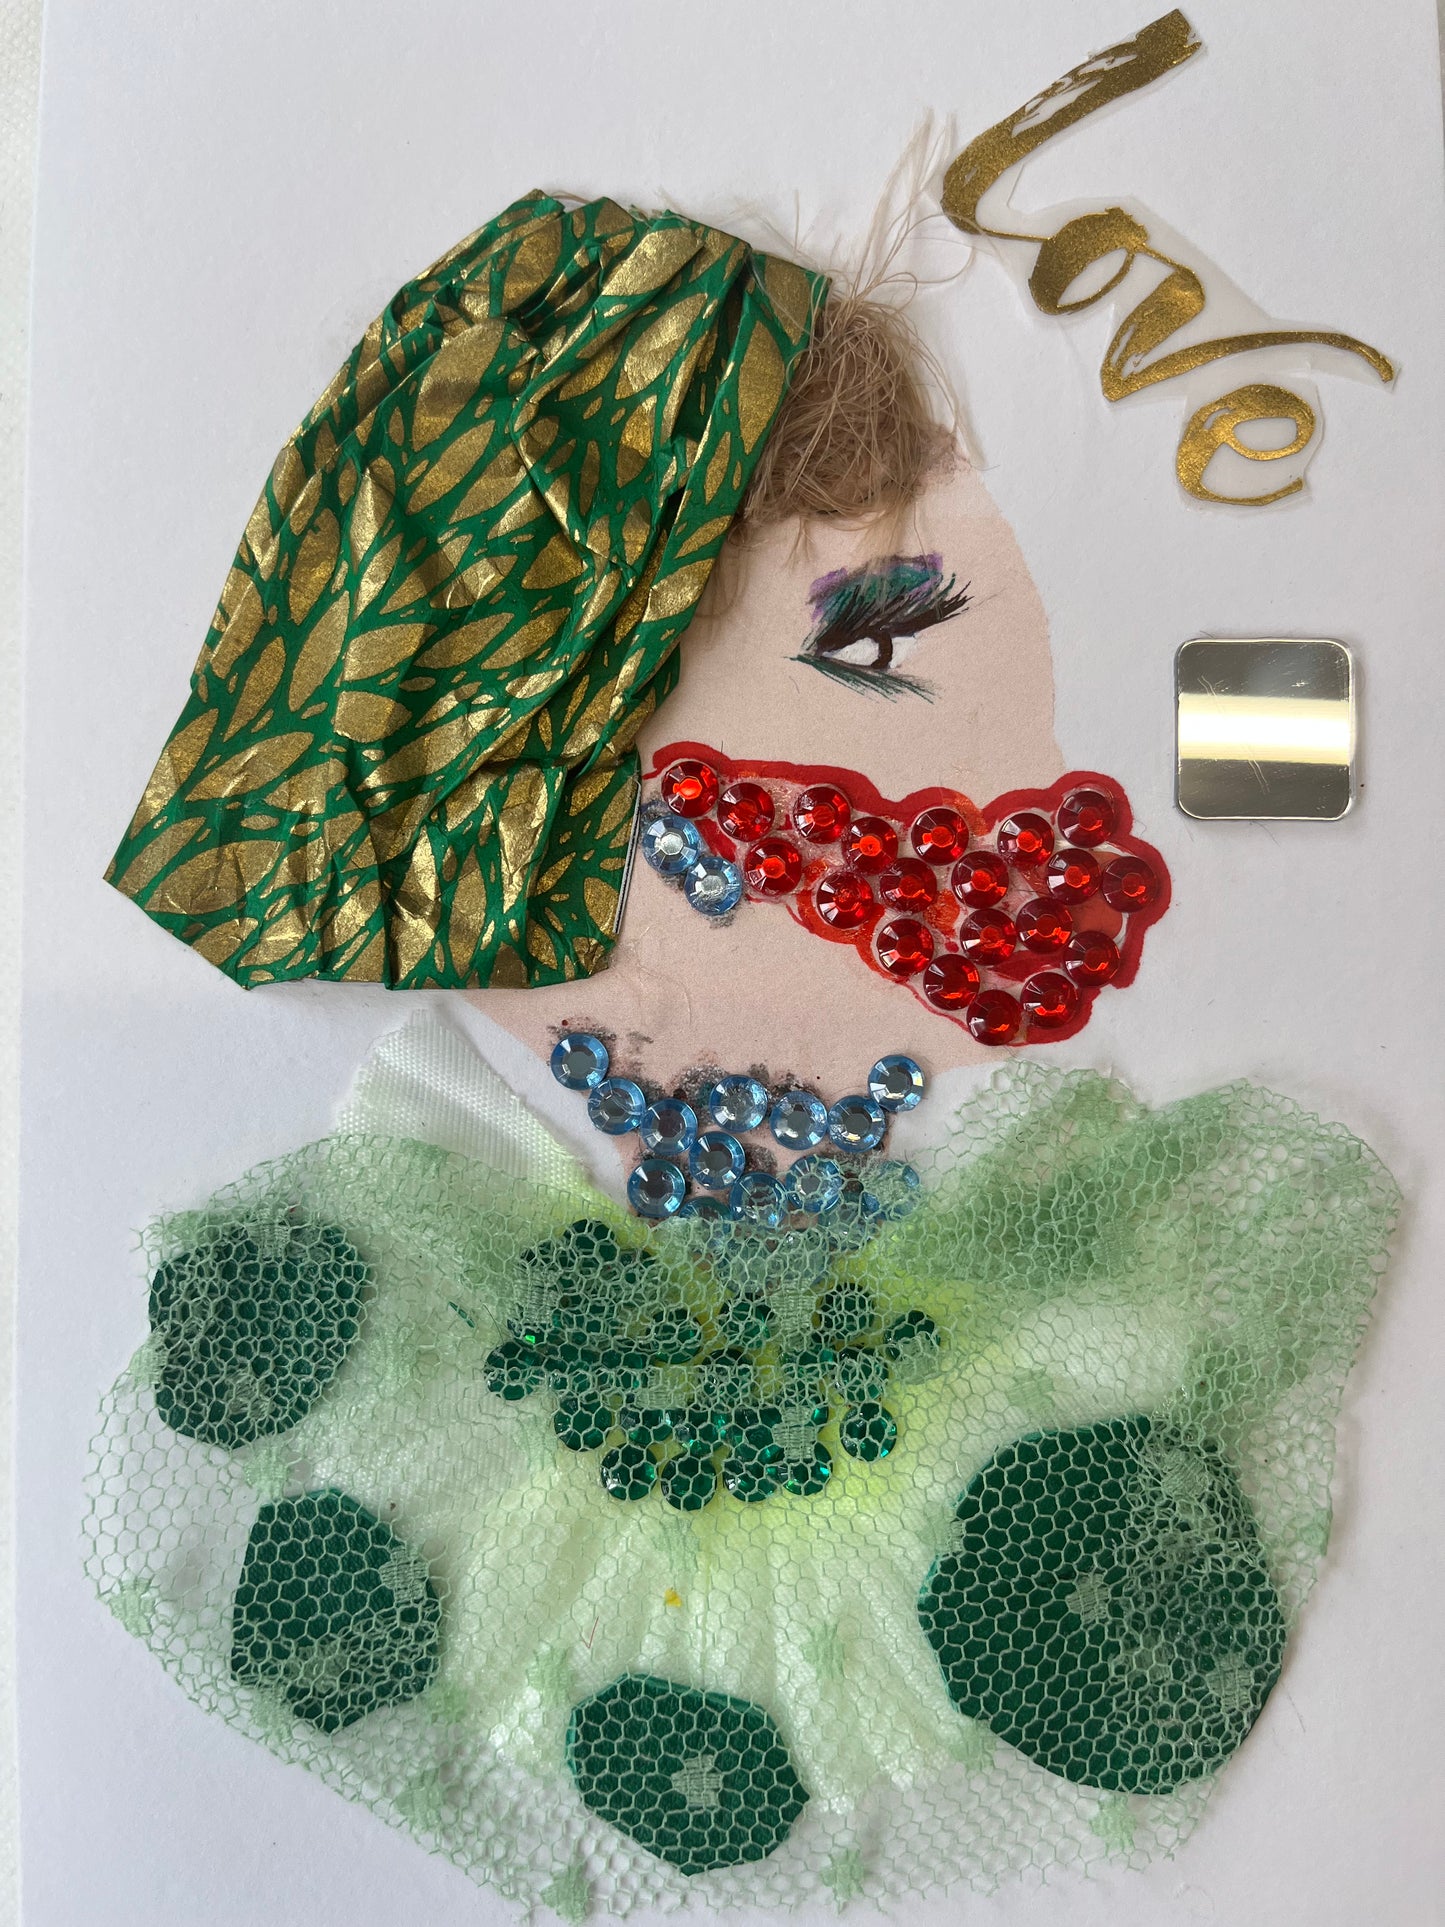 This card has been given the name Love Mask. Love wears a green blouse with small forest green ovals underneath a lighter green sheer mesh. Her necklace and earrings are both made of light blue gems. She wears a red gem mask over her mouth. In her light brown hair, she wears a green headscarf with a gold leaf pattern. In the top right corner, it sayd "love" in gold writing. Underneath, there is a small square mirror. 